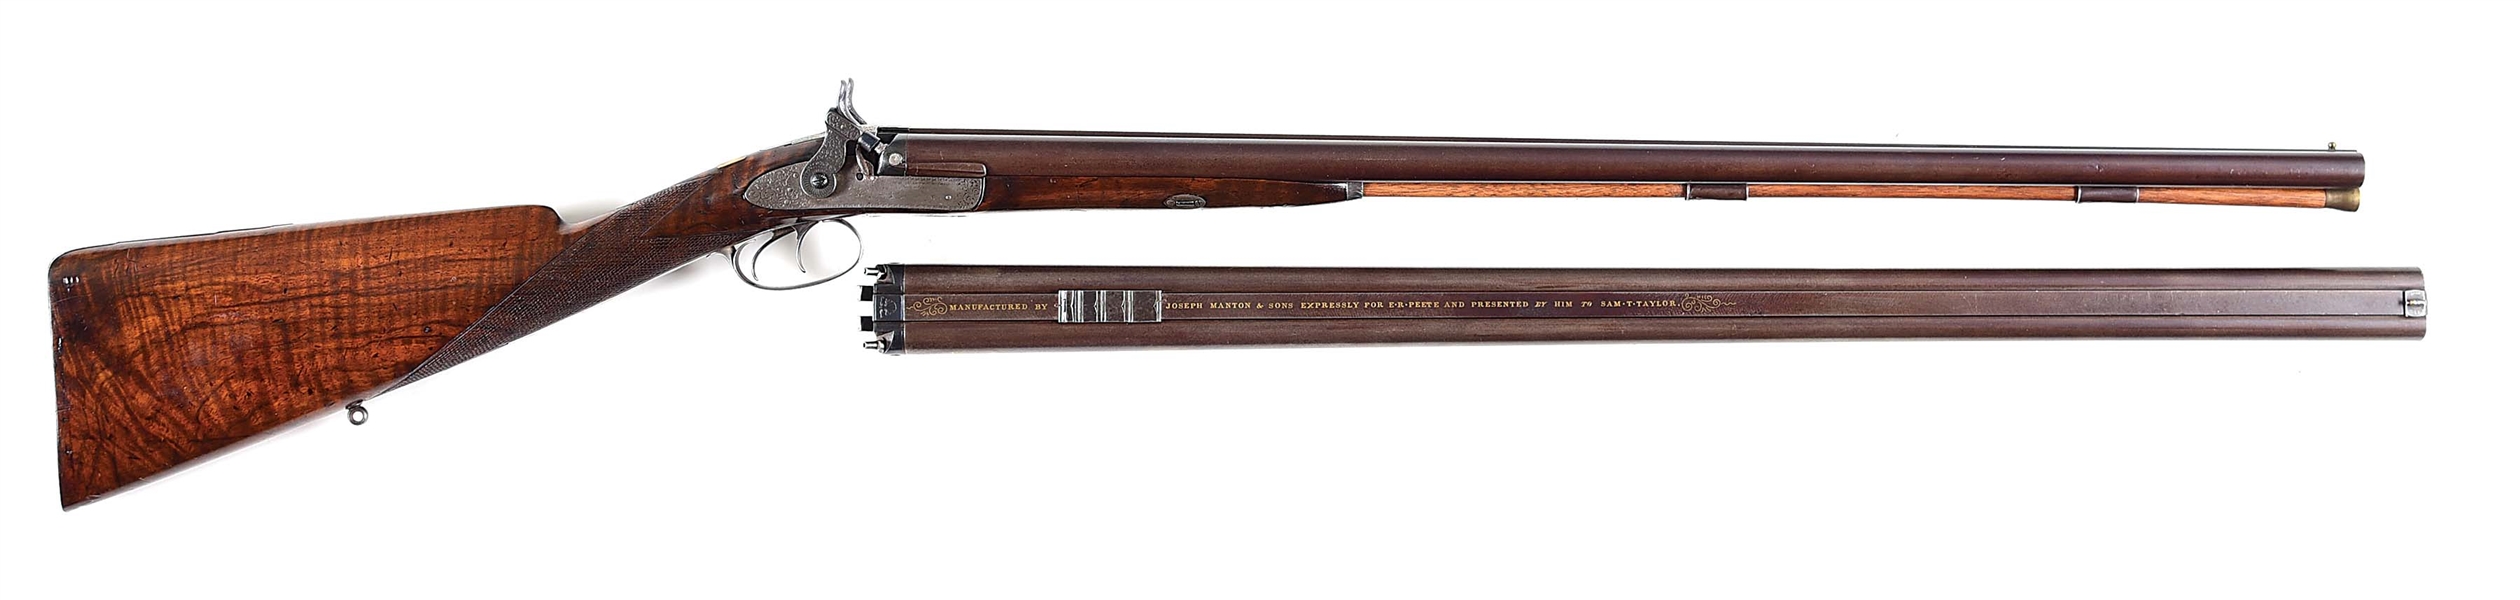 (A) JOSEPH MANTON & SONS PERCUSSION SIDE BY SIDE SHOTGUN WITH RIFLE BARRELS